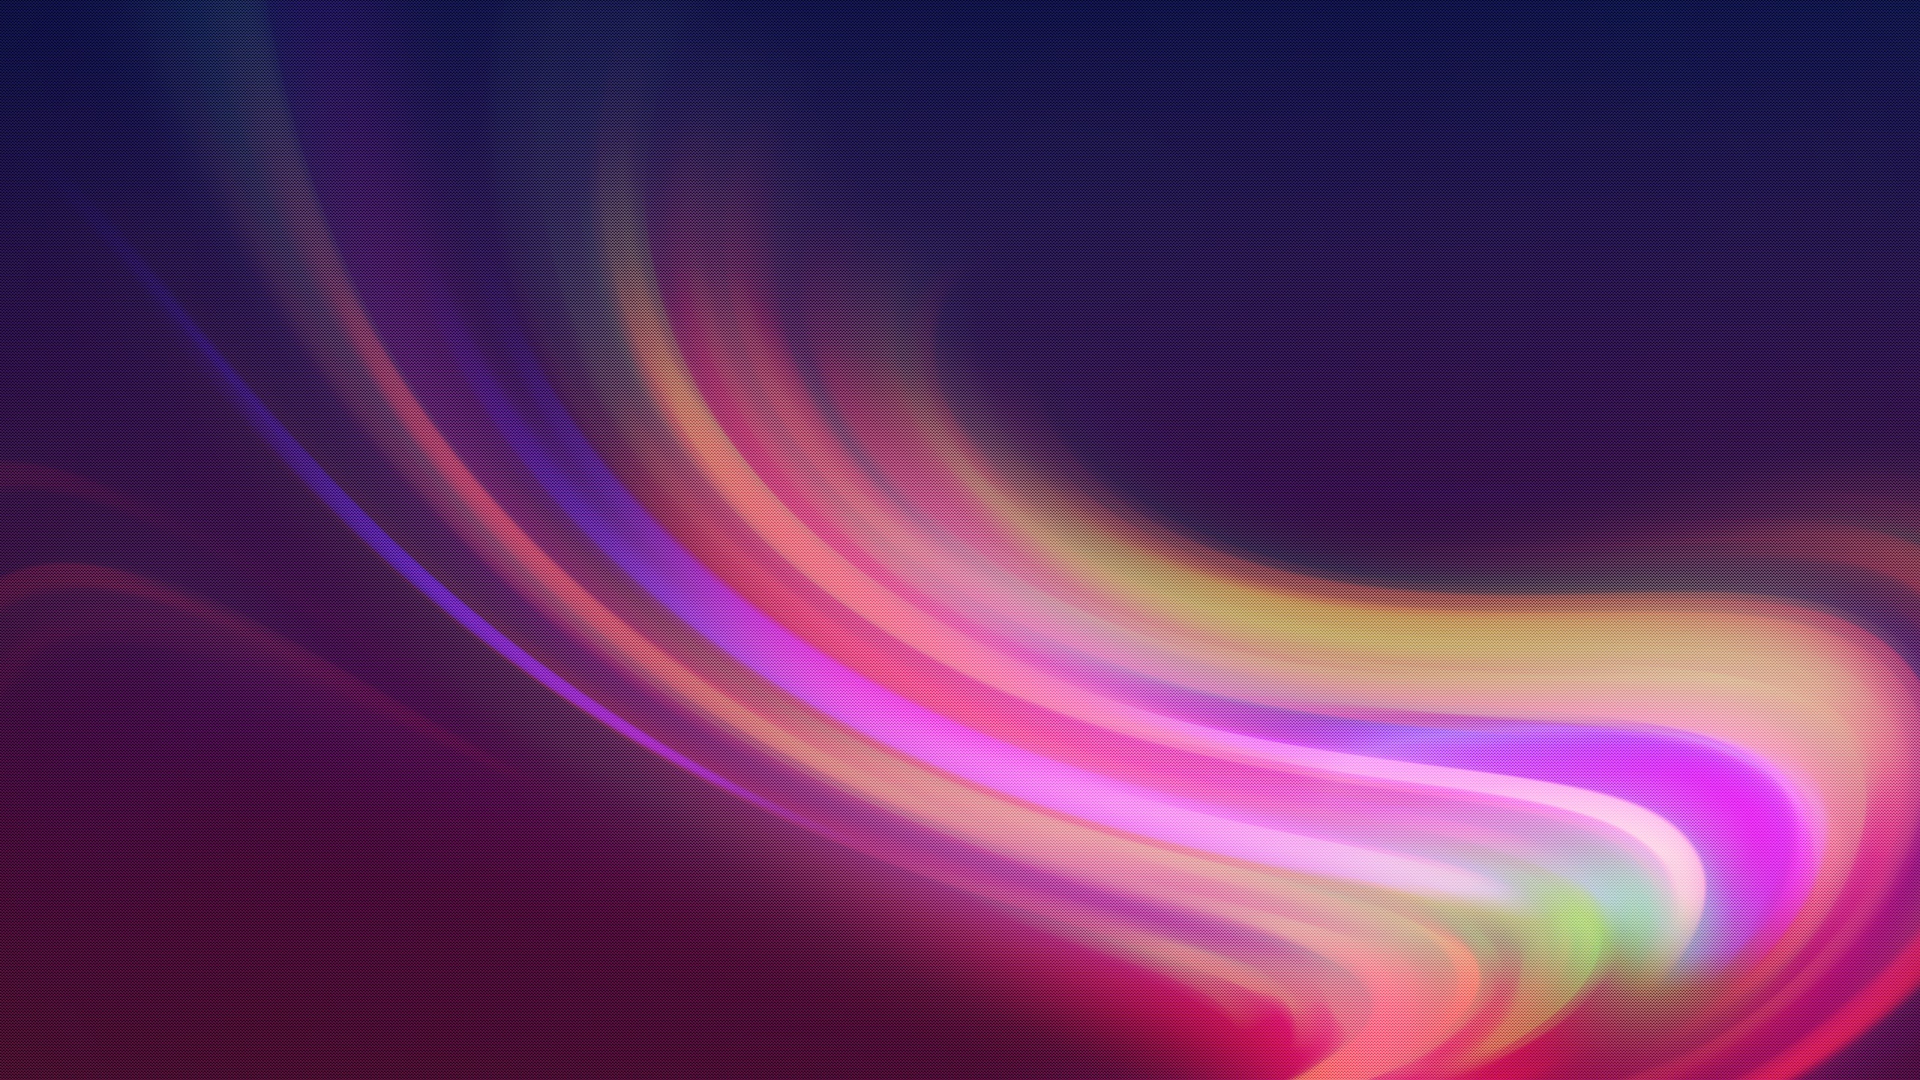 abstract wallpapers hd curves 2